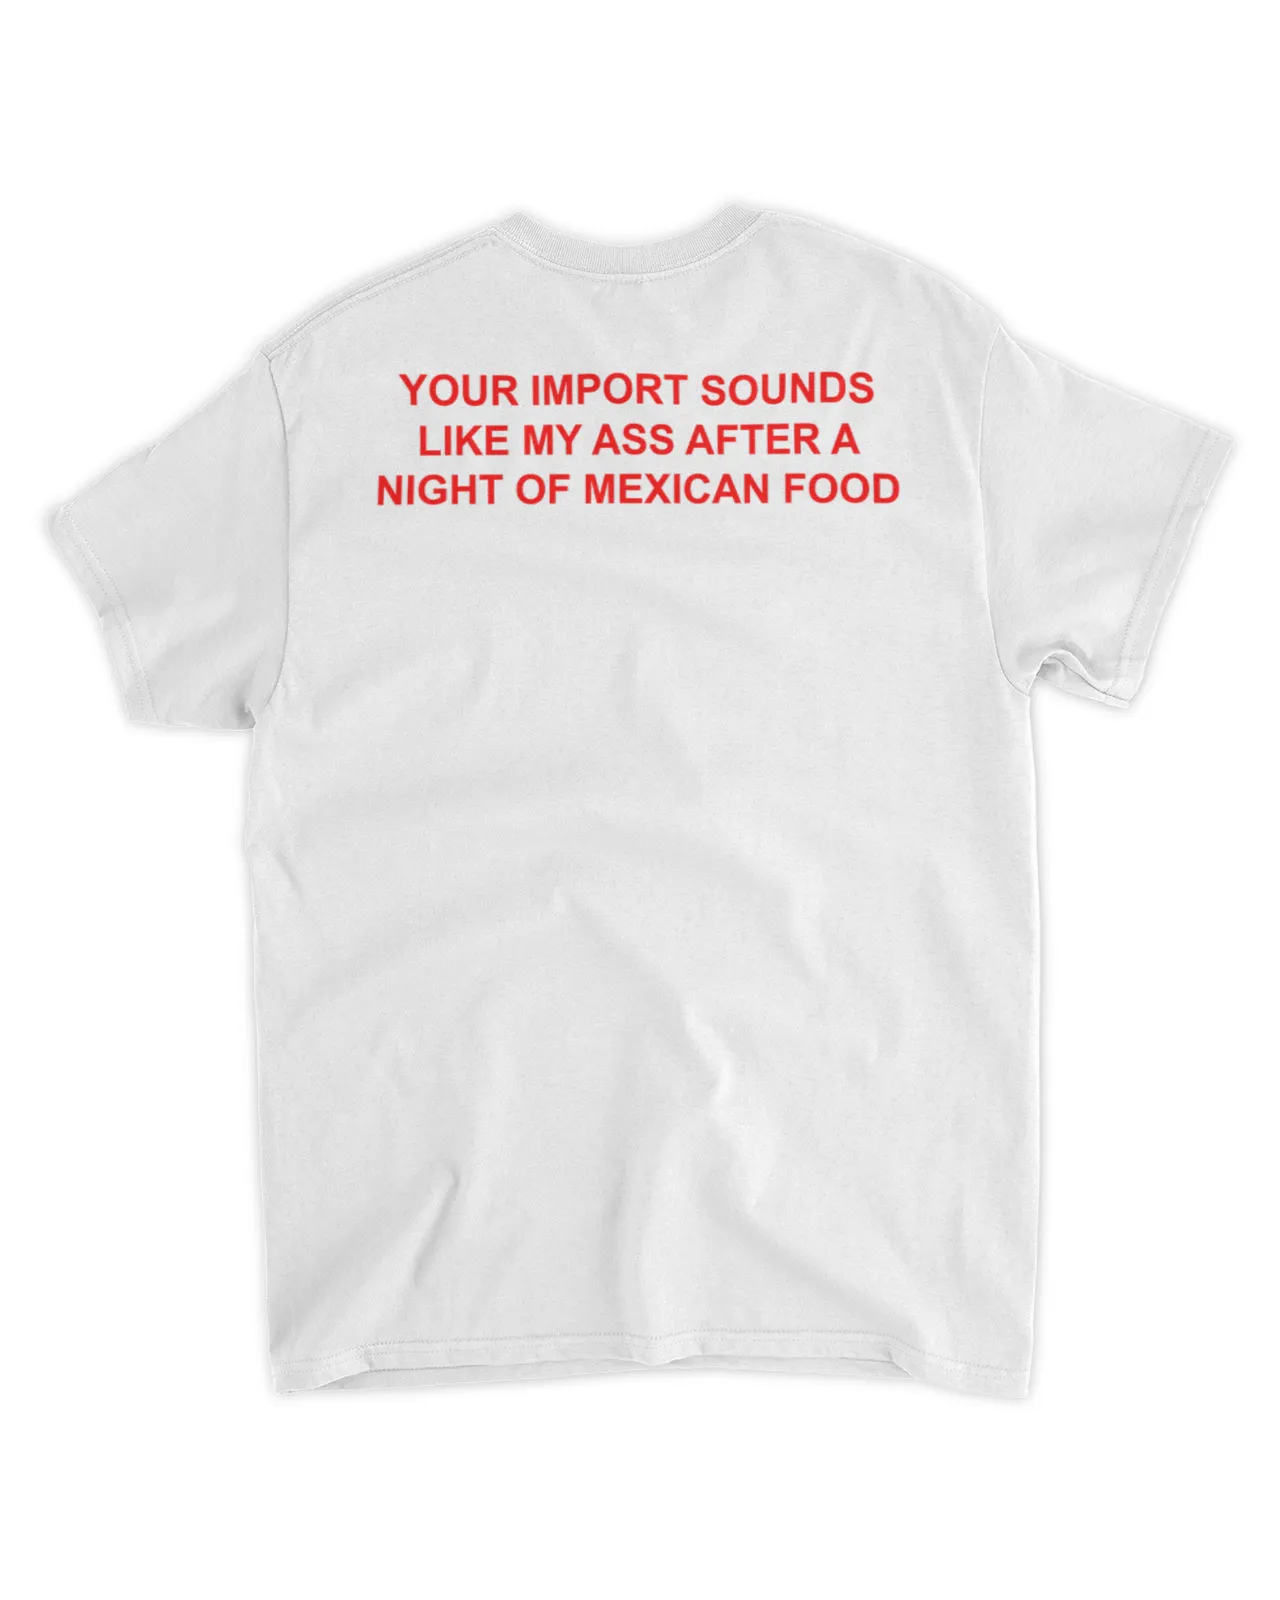  Your import sounds like my ass after a night of Mexican food shirt